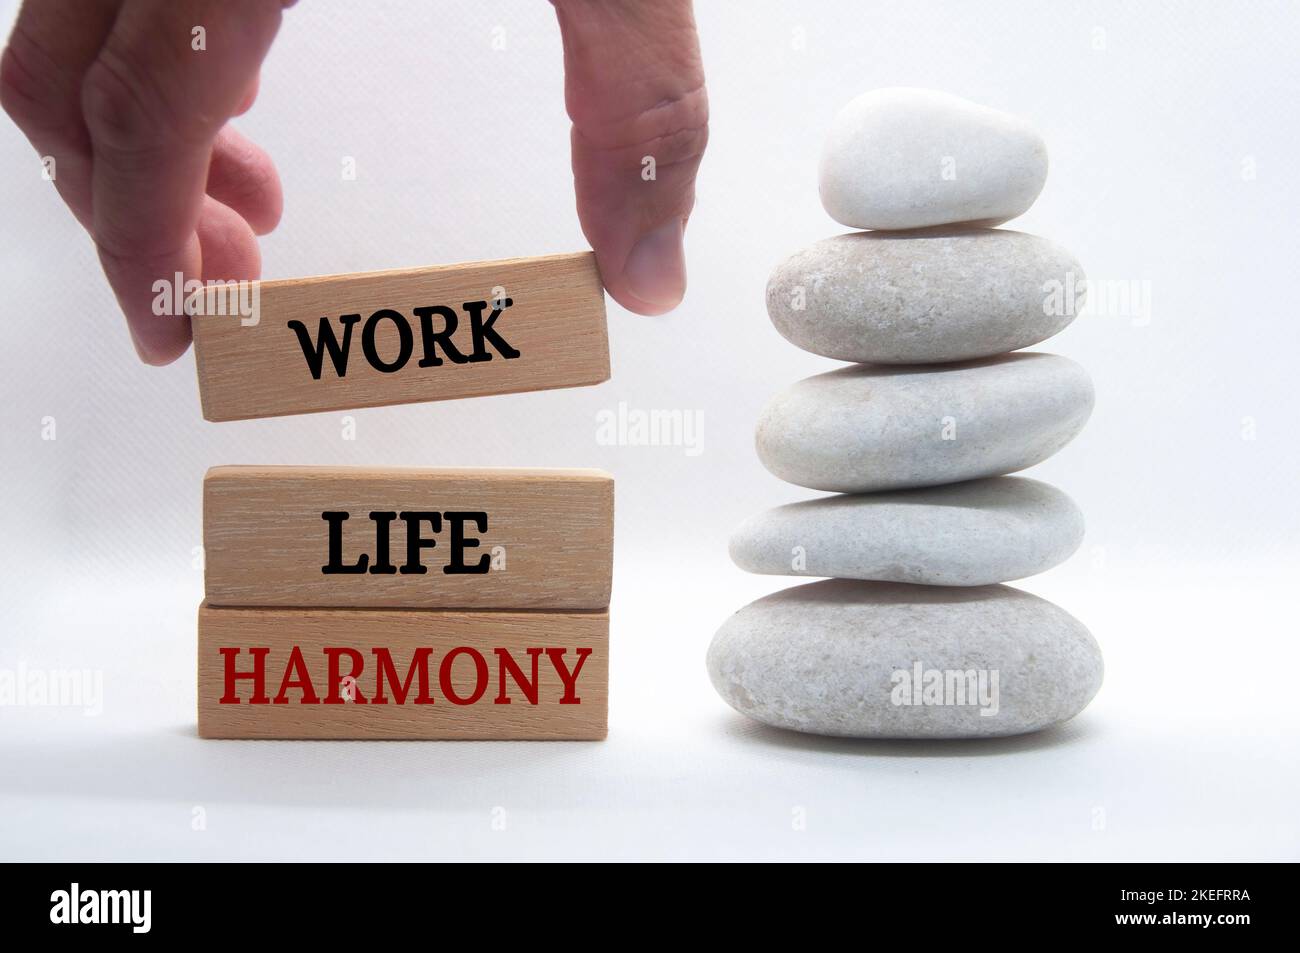 Work life harmony text on wooden blocks with zen stones background. Working culture concept. Stock Photo